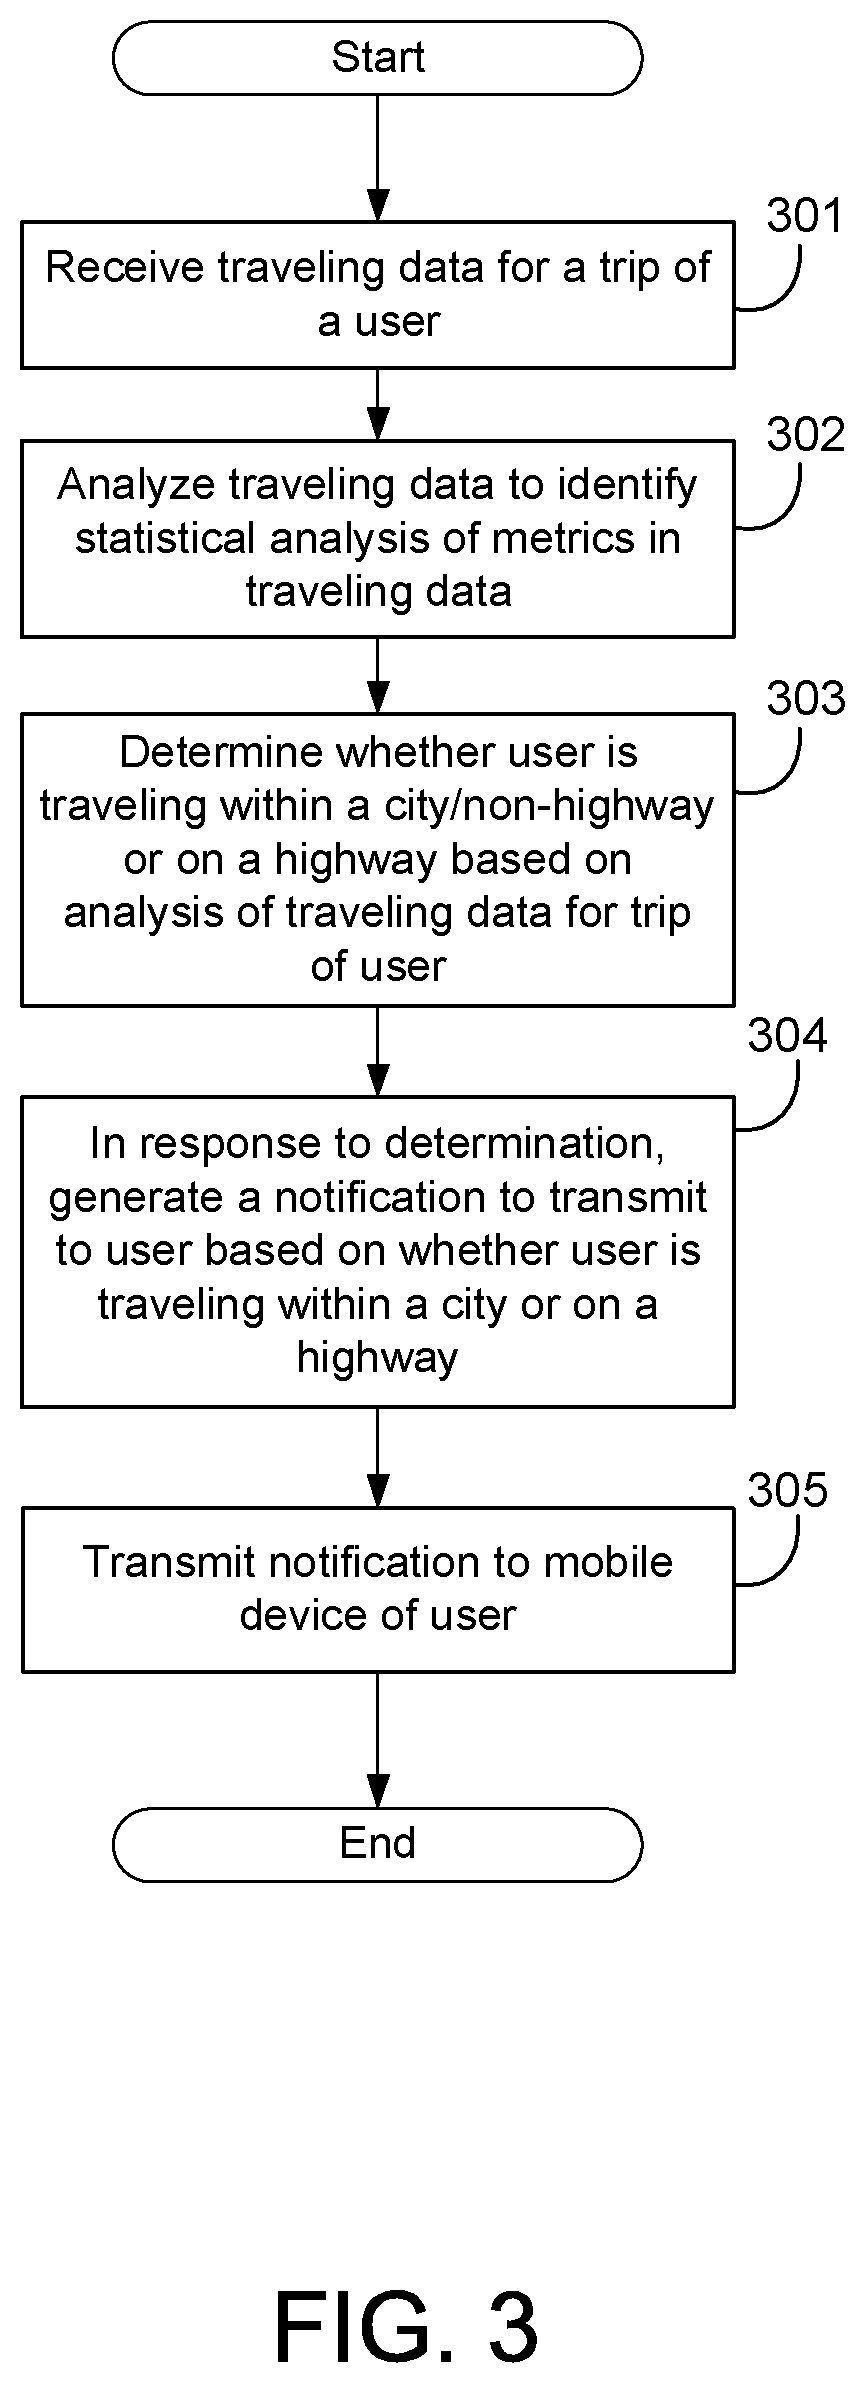 Highway detection system for generating customized notifications